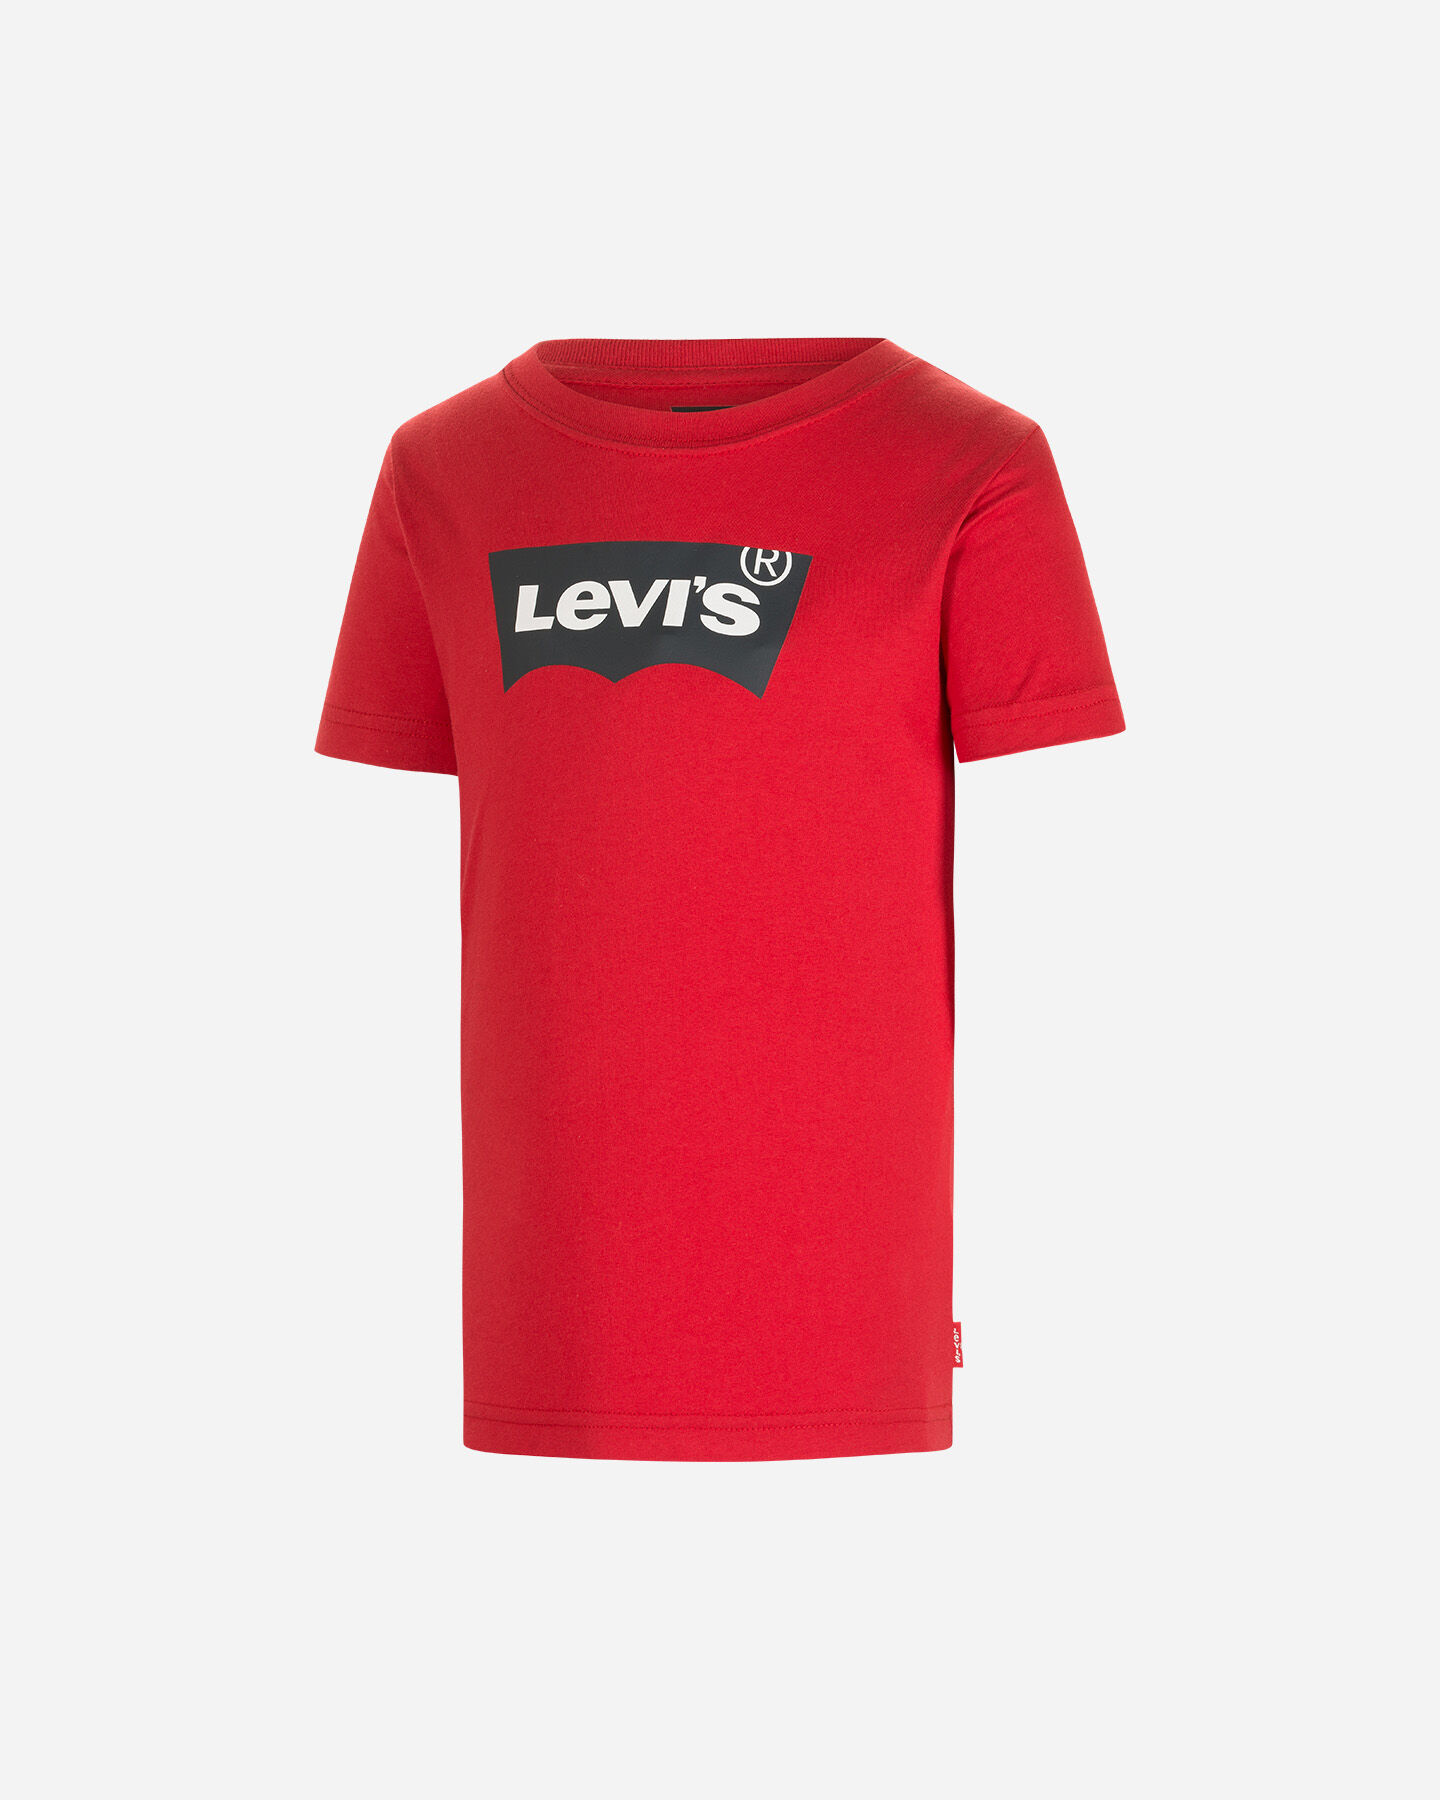  T-Shirt LEVI'S BWING LOGO JR S4088938|R86|6A scatto 0